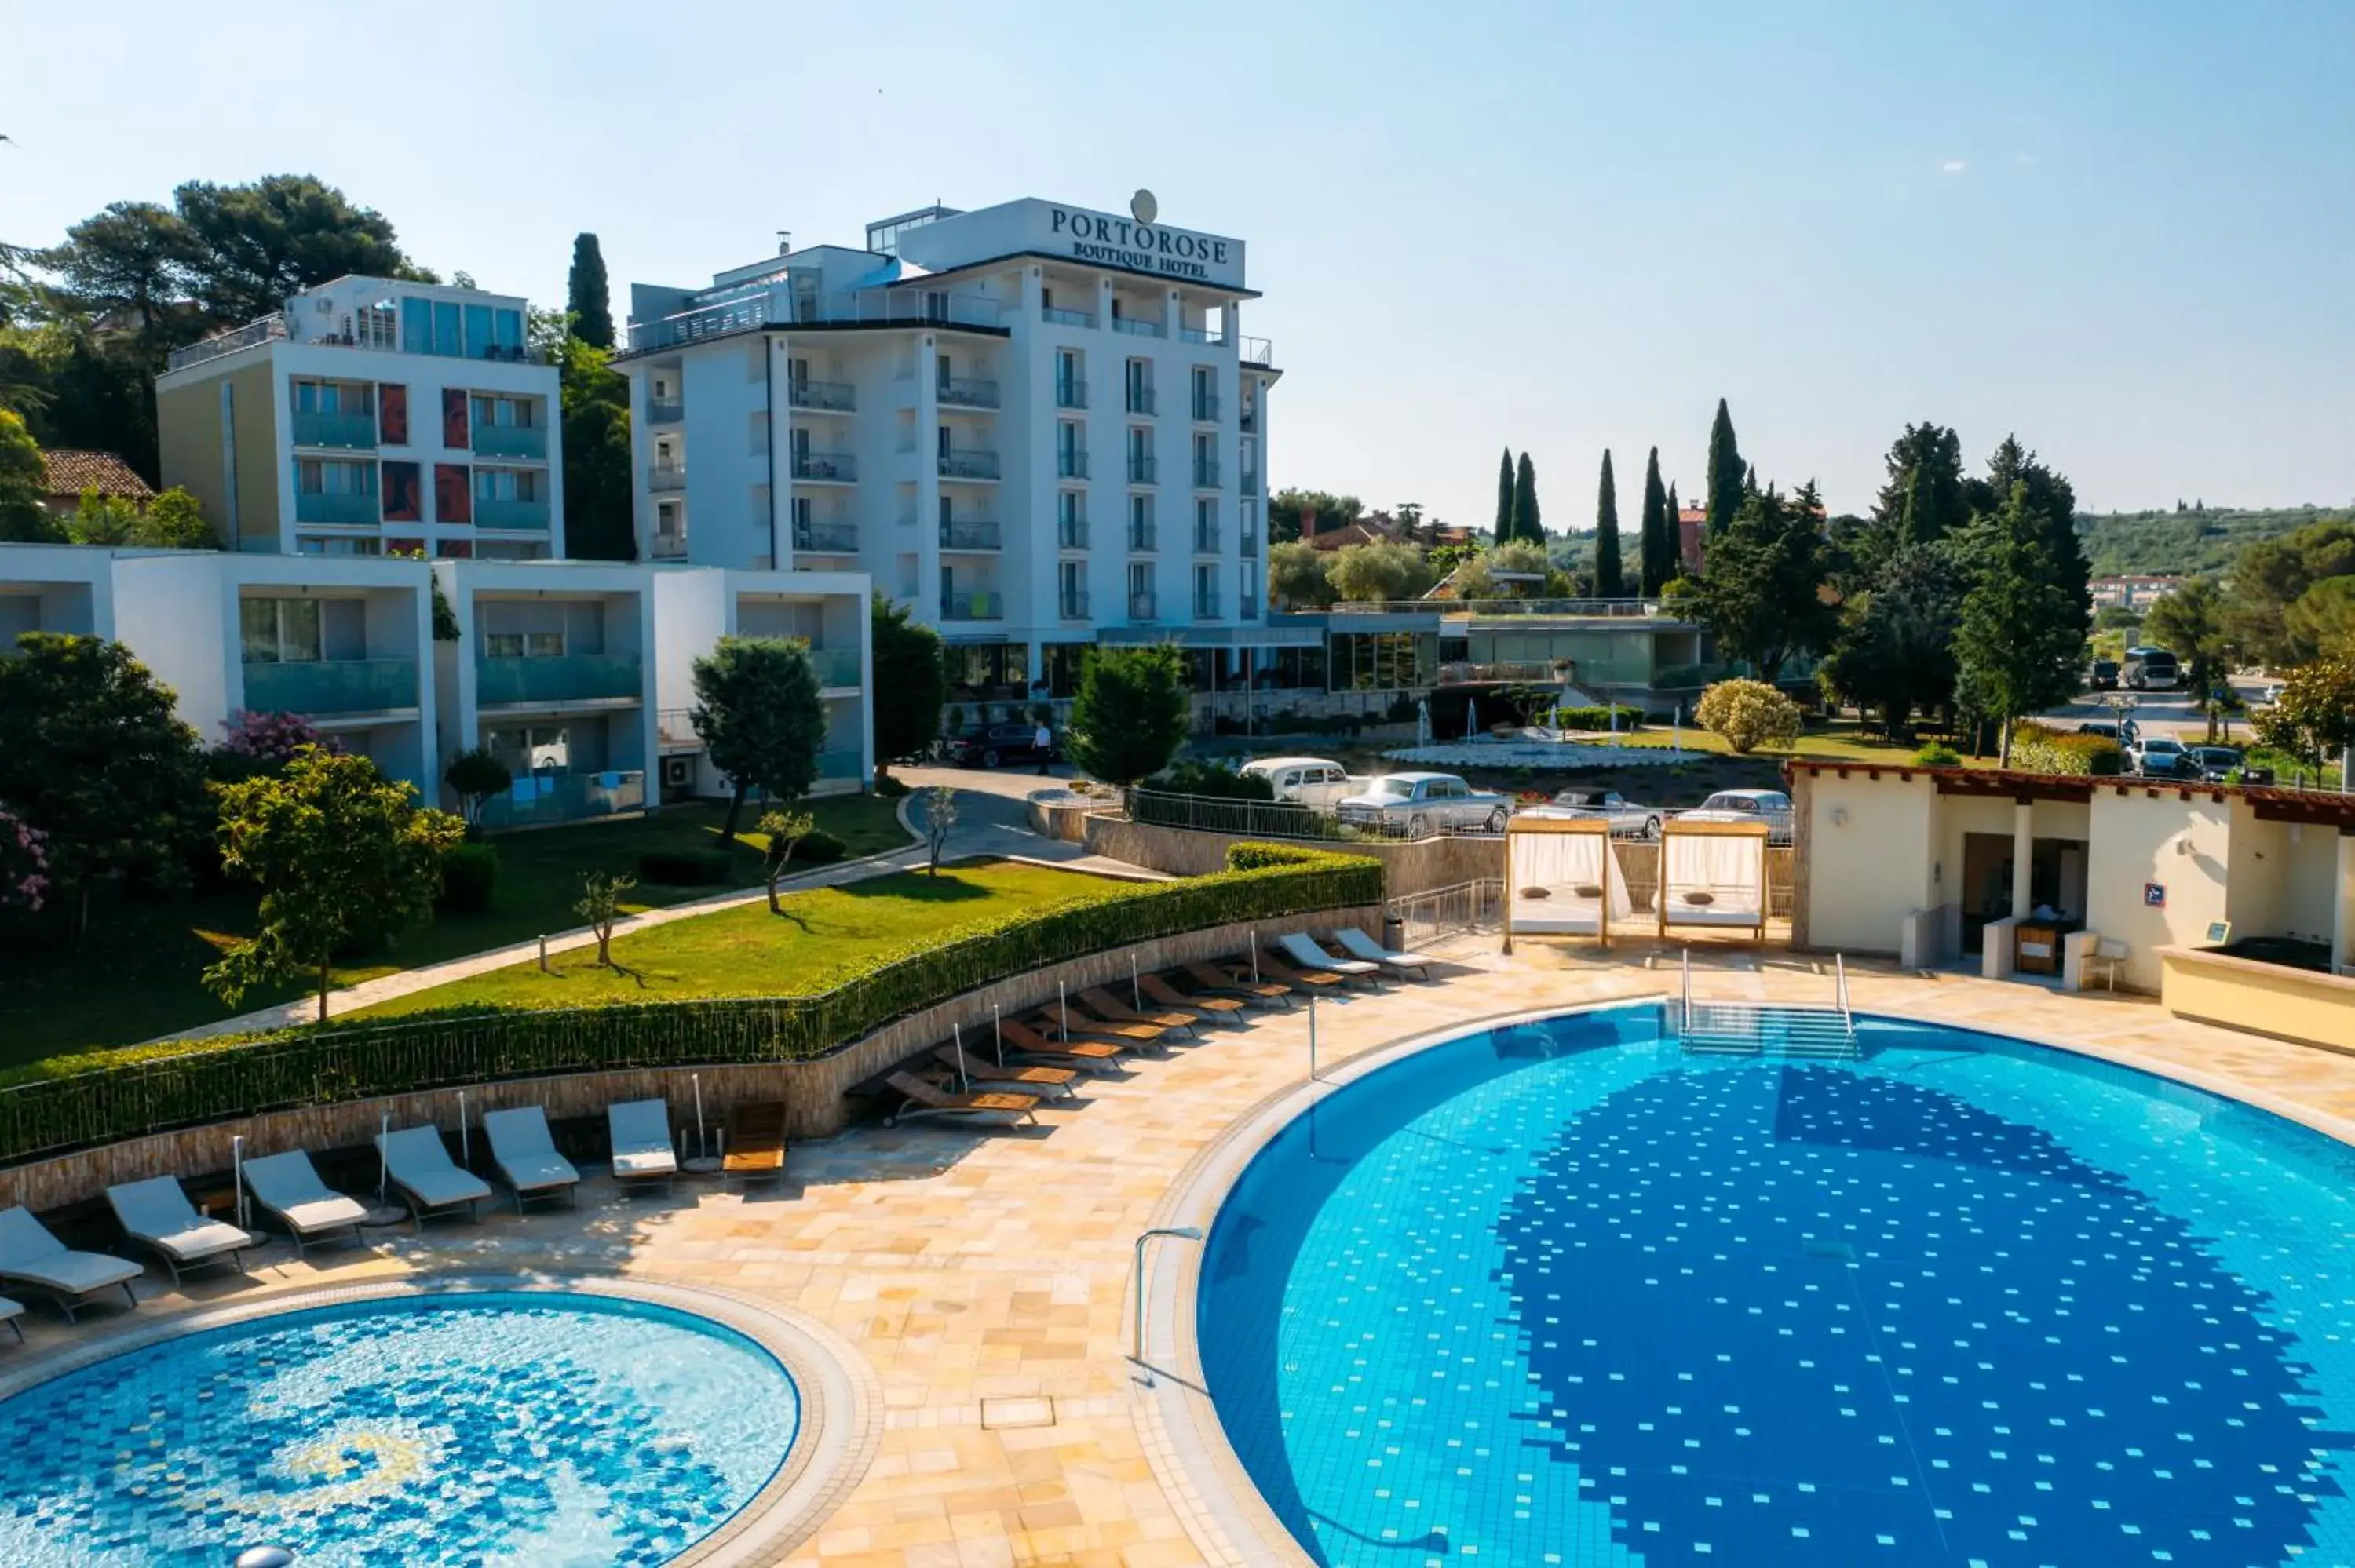 Property building, Pool View in Boutique Hotel Portorose